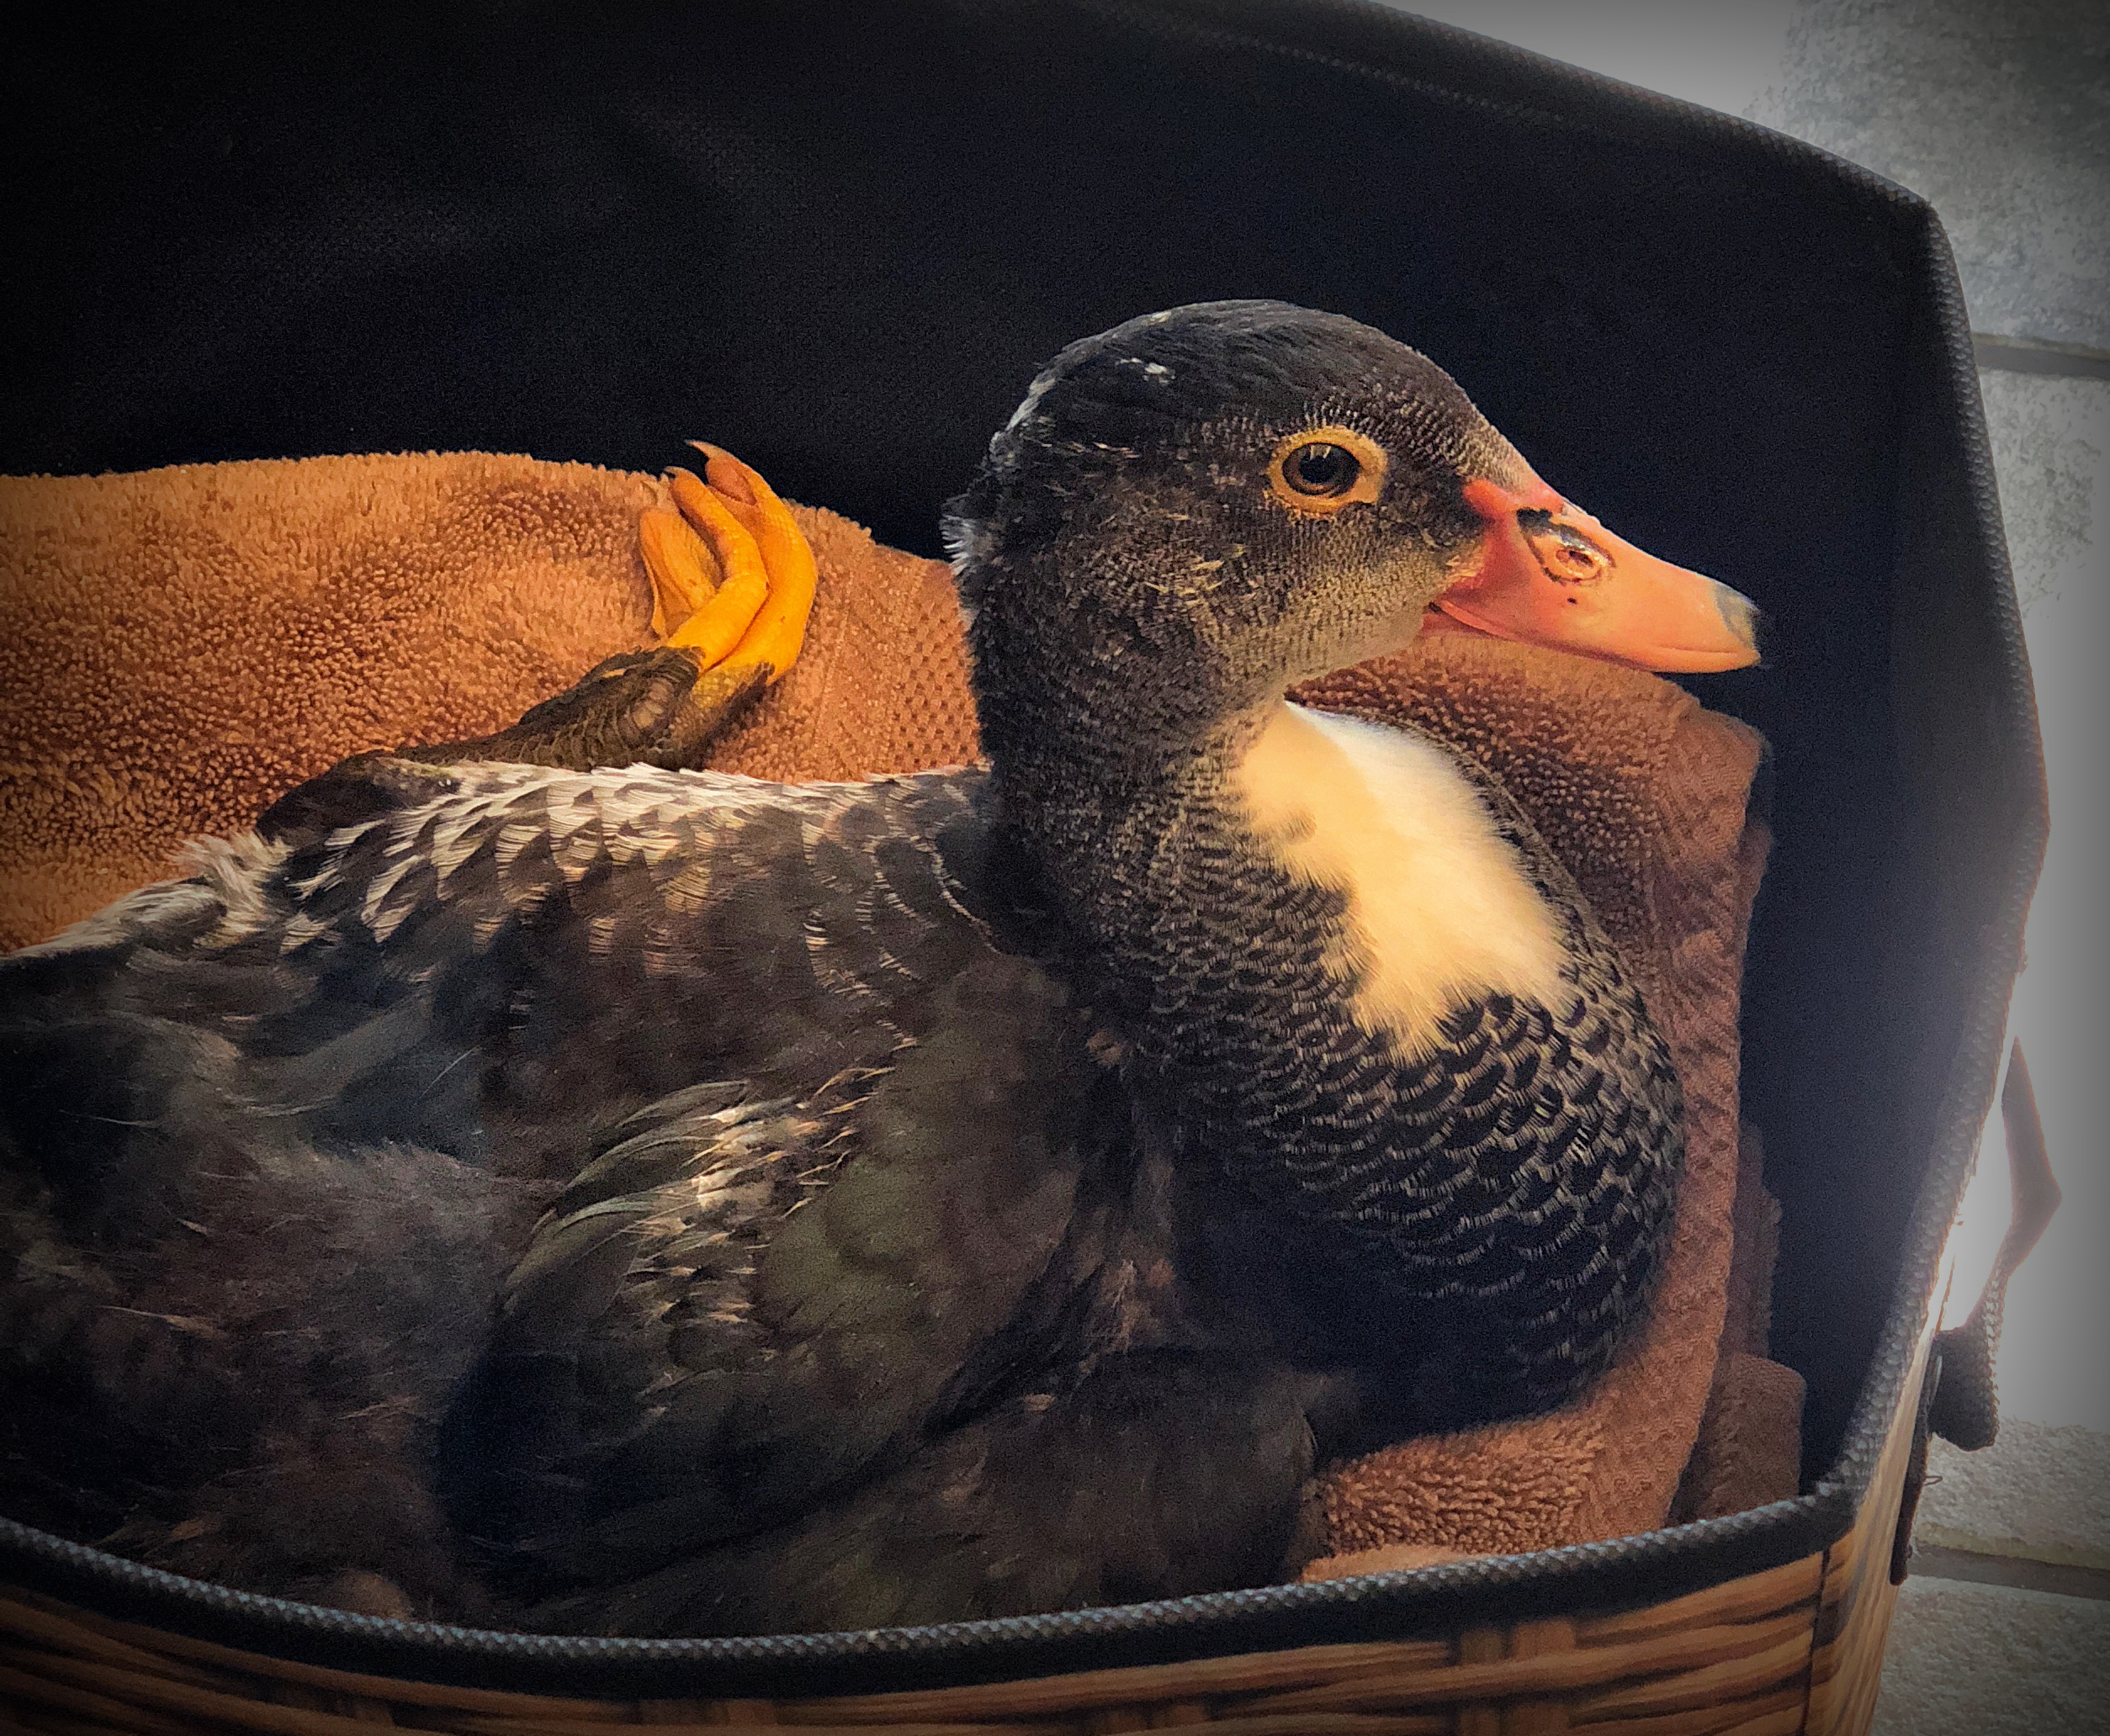 A photo of a duck sitting in a box with a towel.